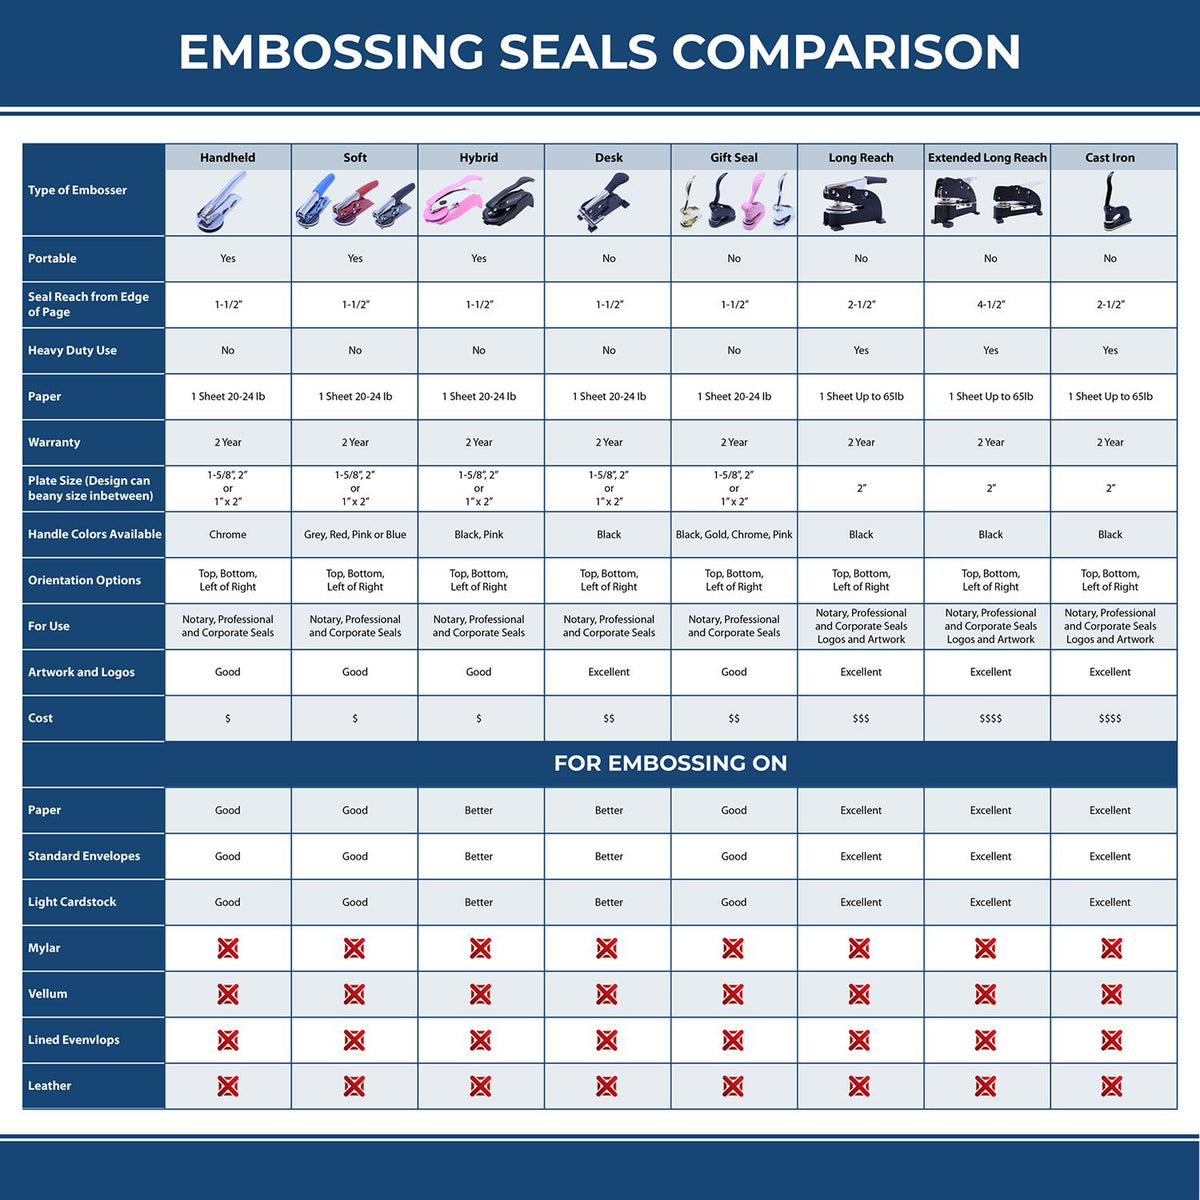 A comparison chart for the different types of mount models available for the Hybrid South Carolina Land Surveyor Seal